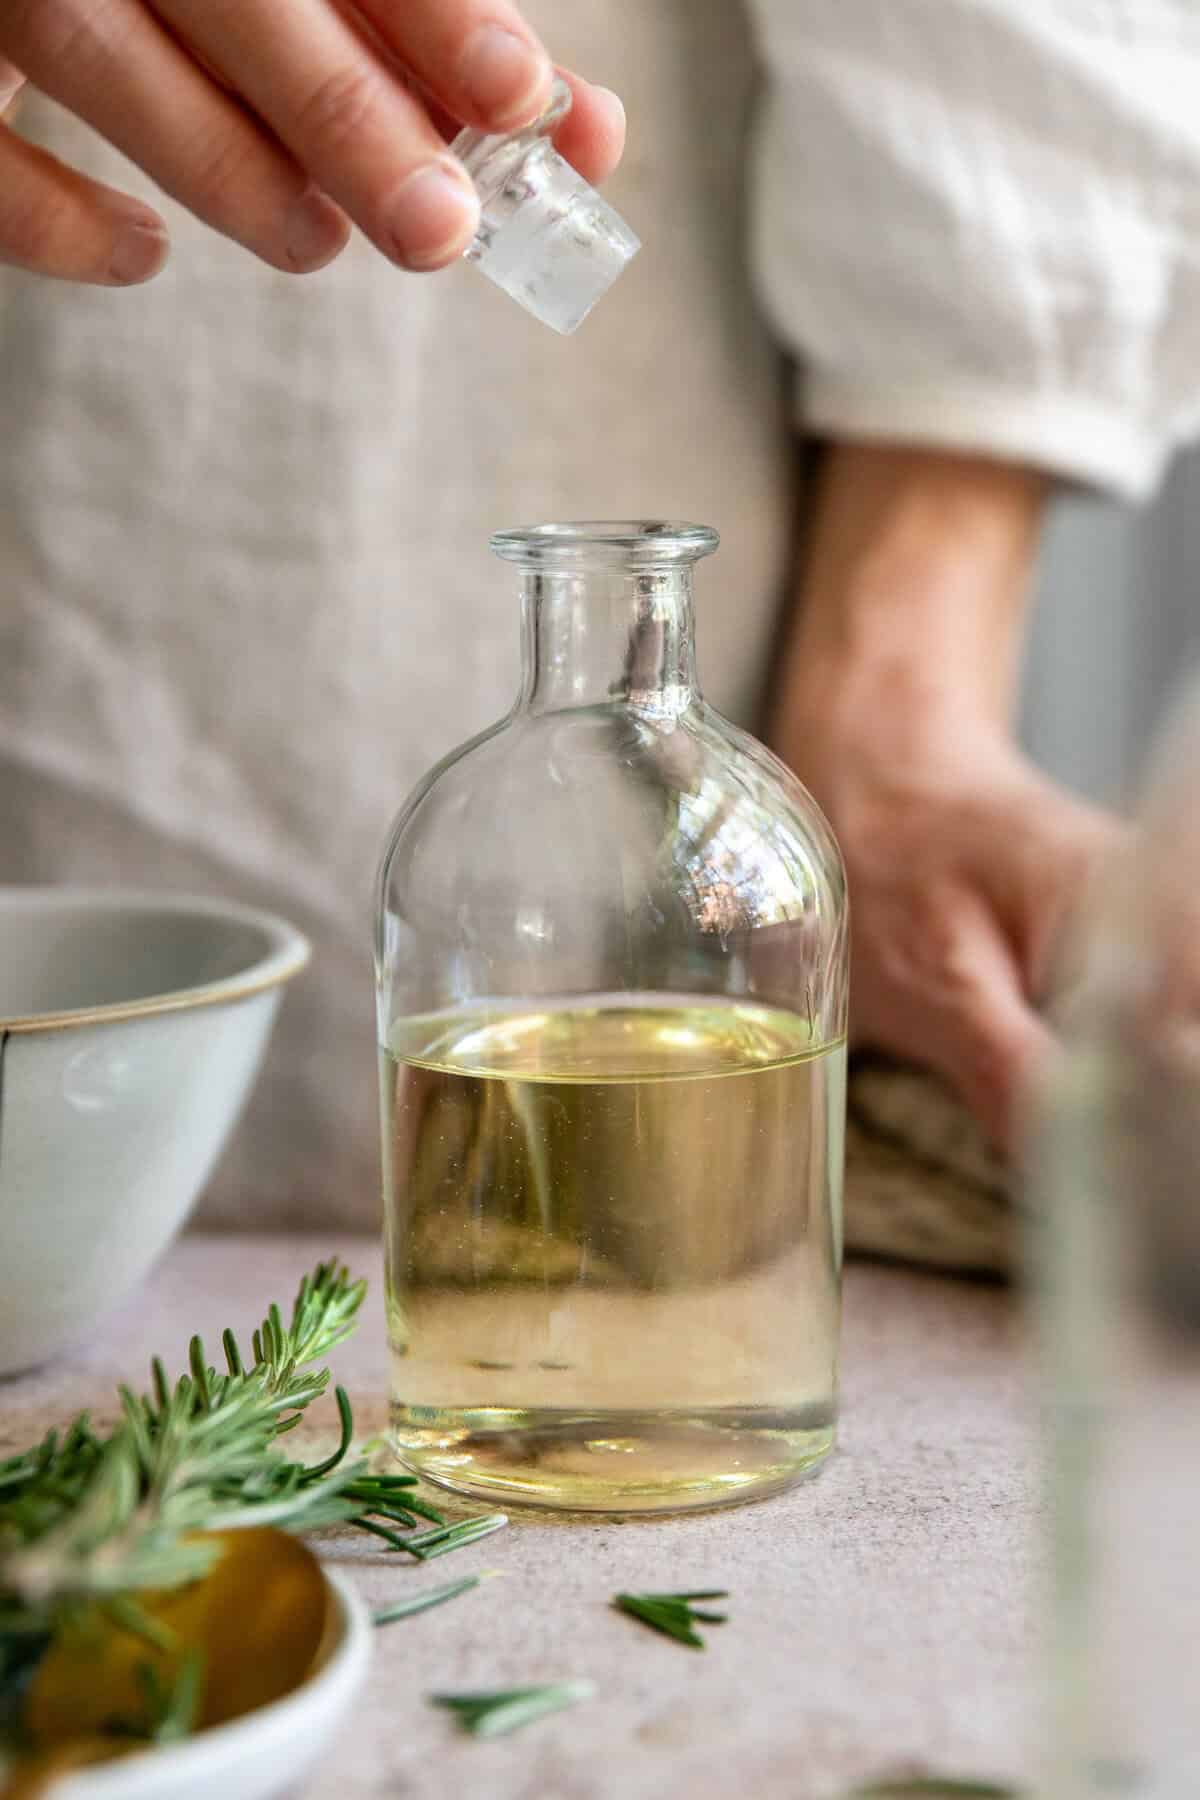 Store rosemary oil for hair in a cool, dry spot